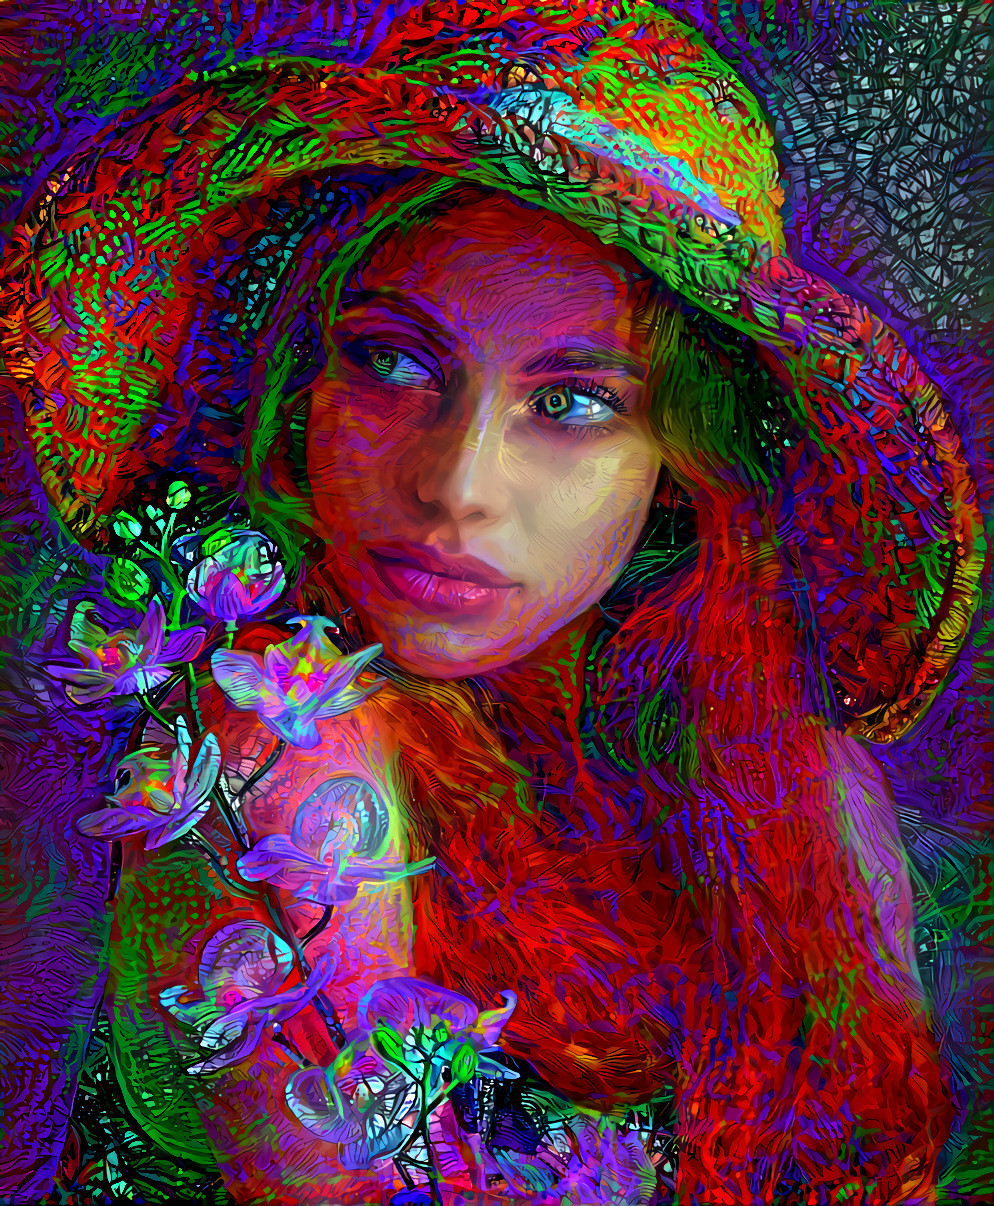 #DDGChallenge - JWildfire Layers style challenge. Girl with Hat (Image by Jerzy Górecki from Pixabay)